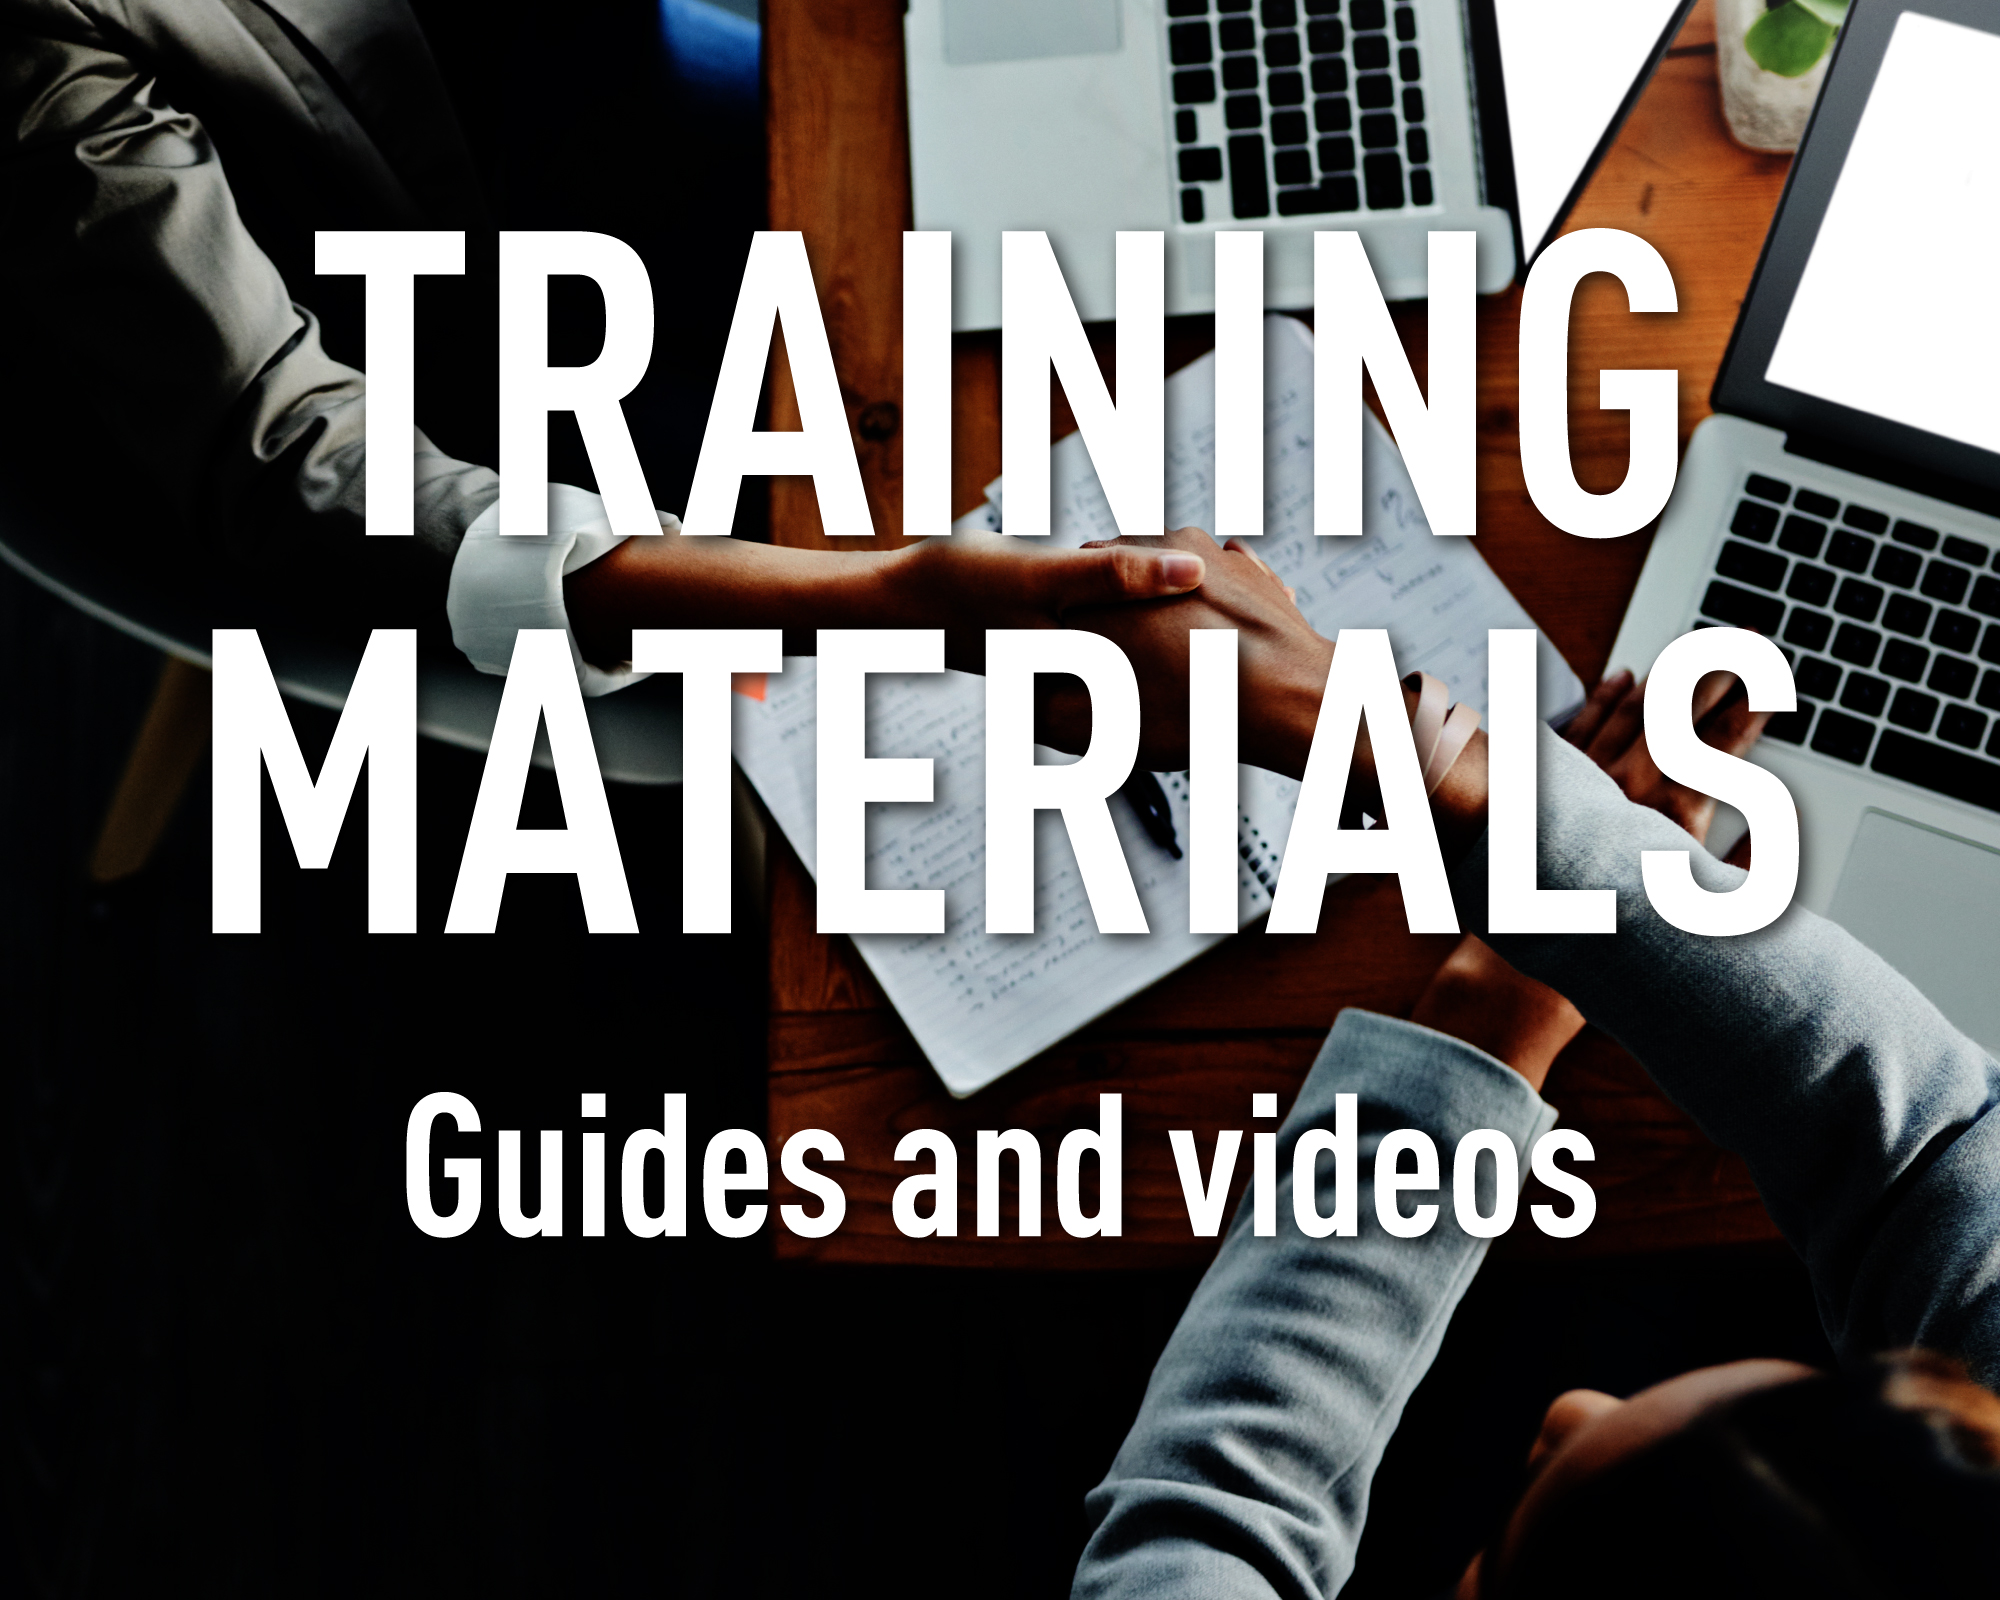 Training Materials. Guides and videos.